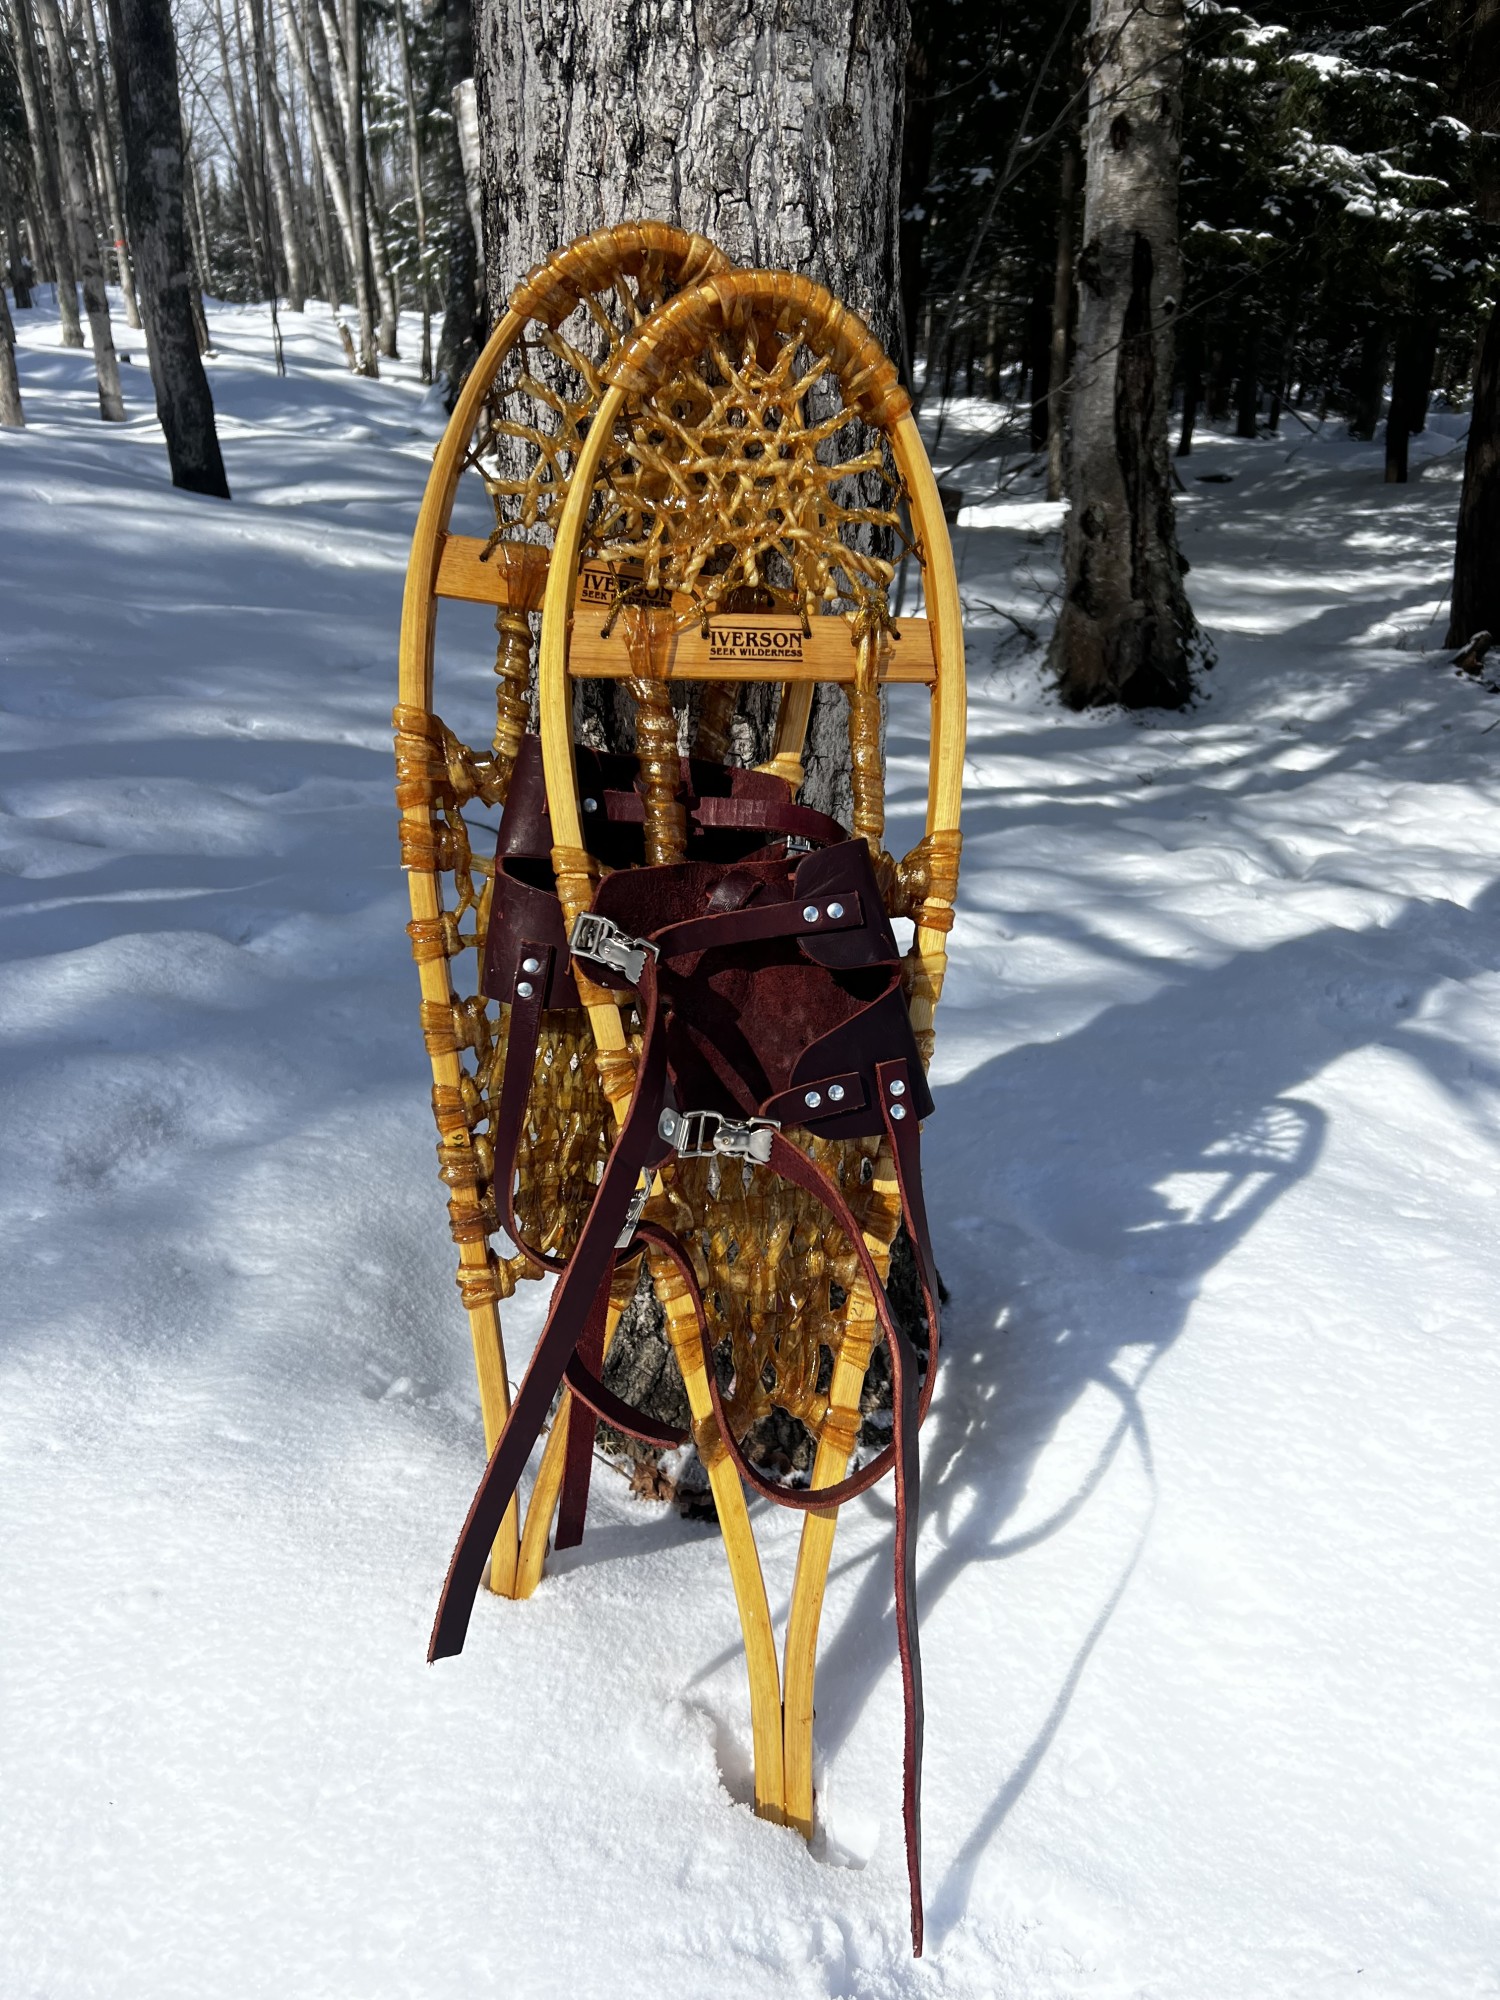 Michigan/Huron snowshoes resting on a tree in a snowy landscape